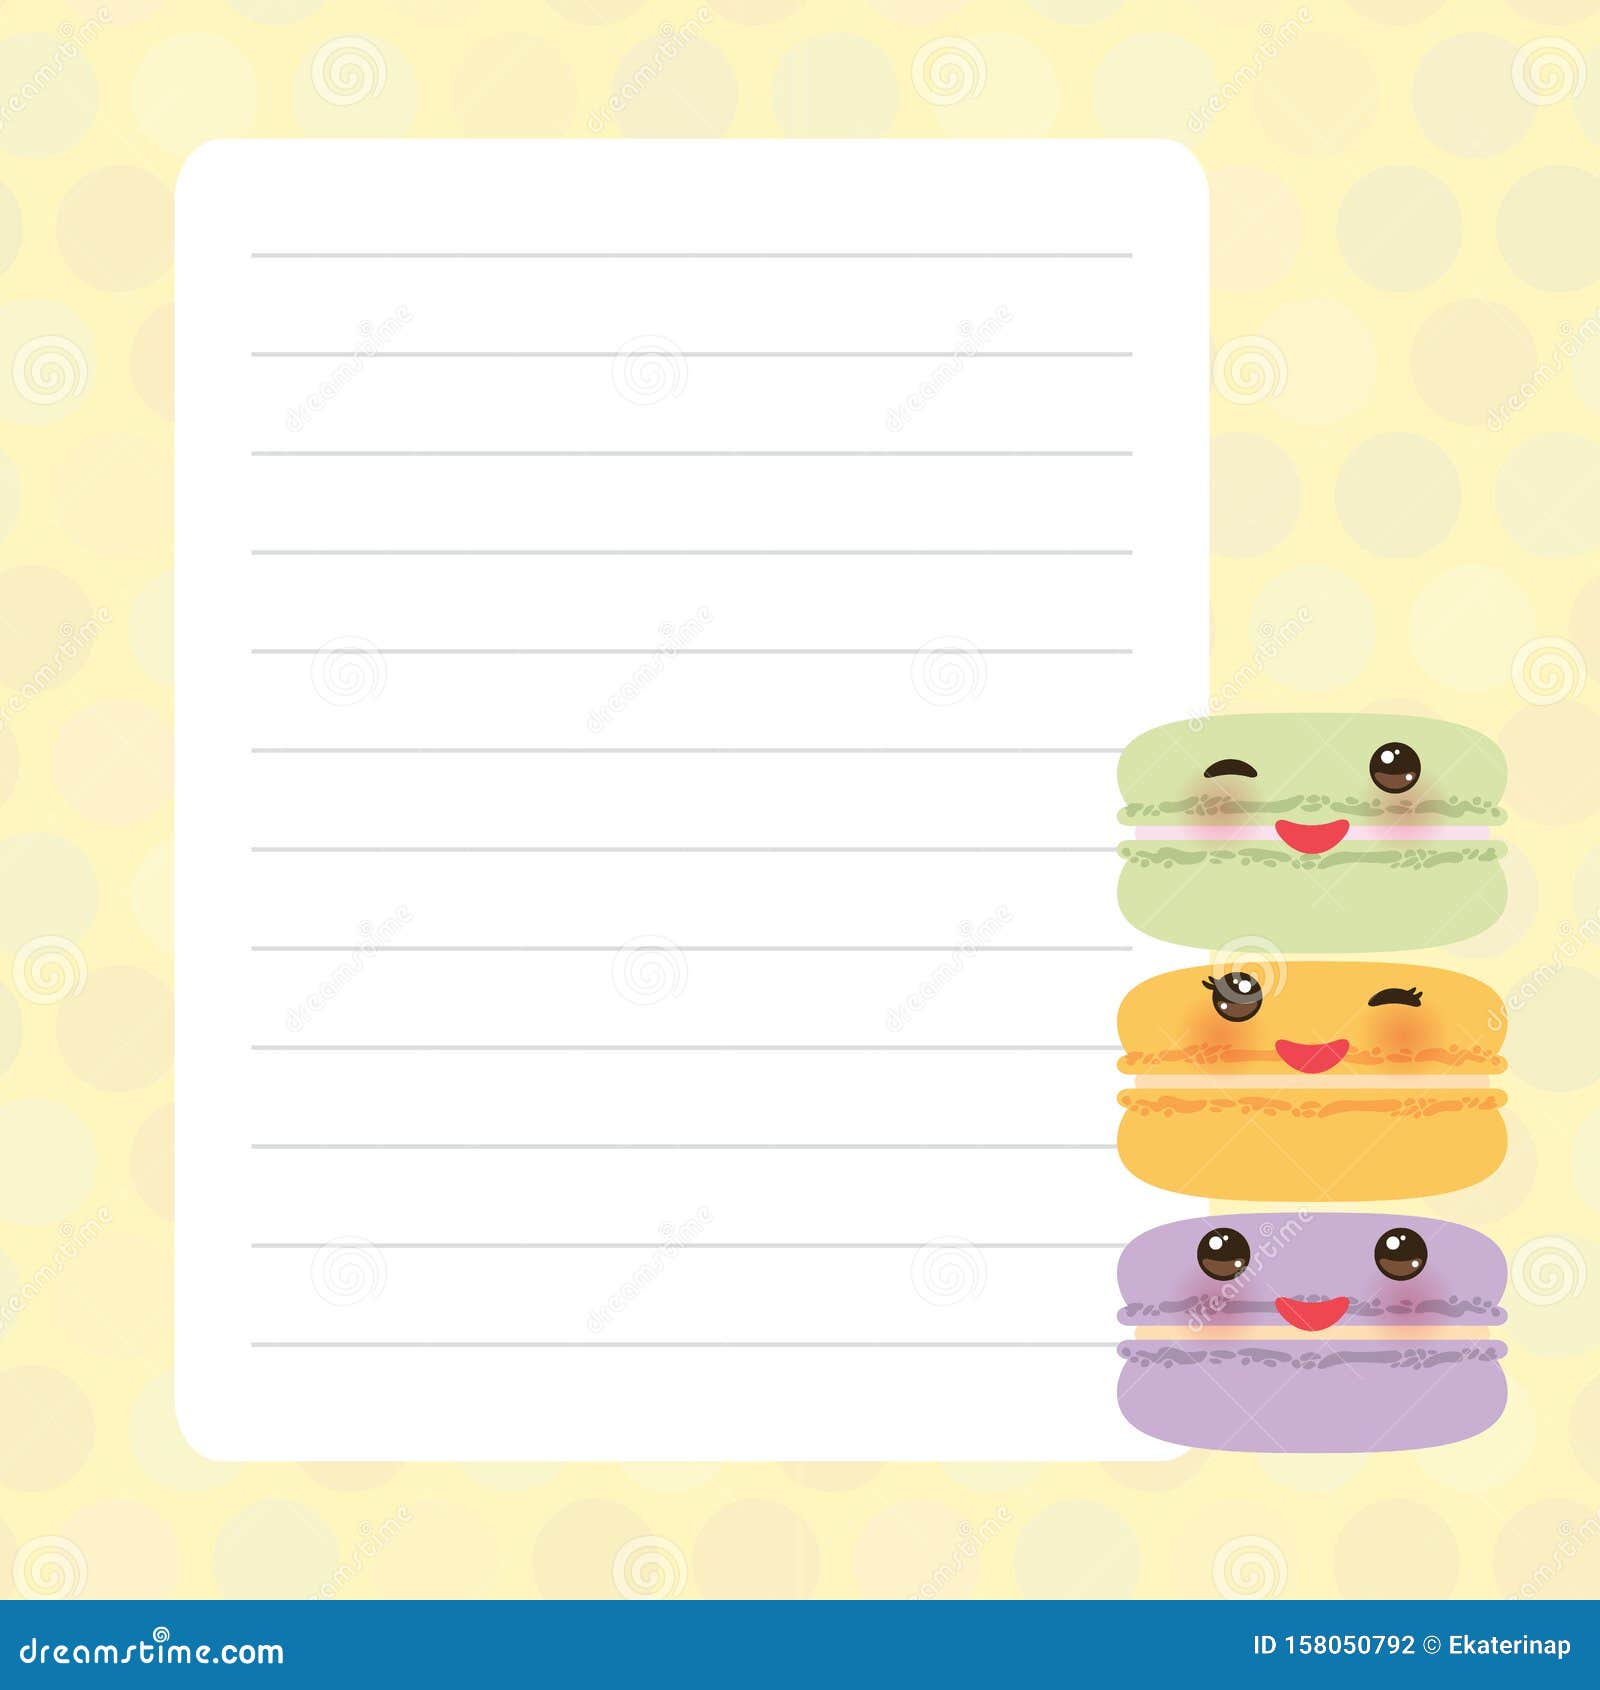 Kawaii Notebook Page Template Stock Illustration - Download Image